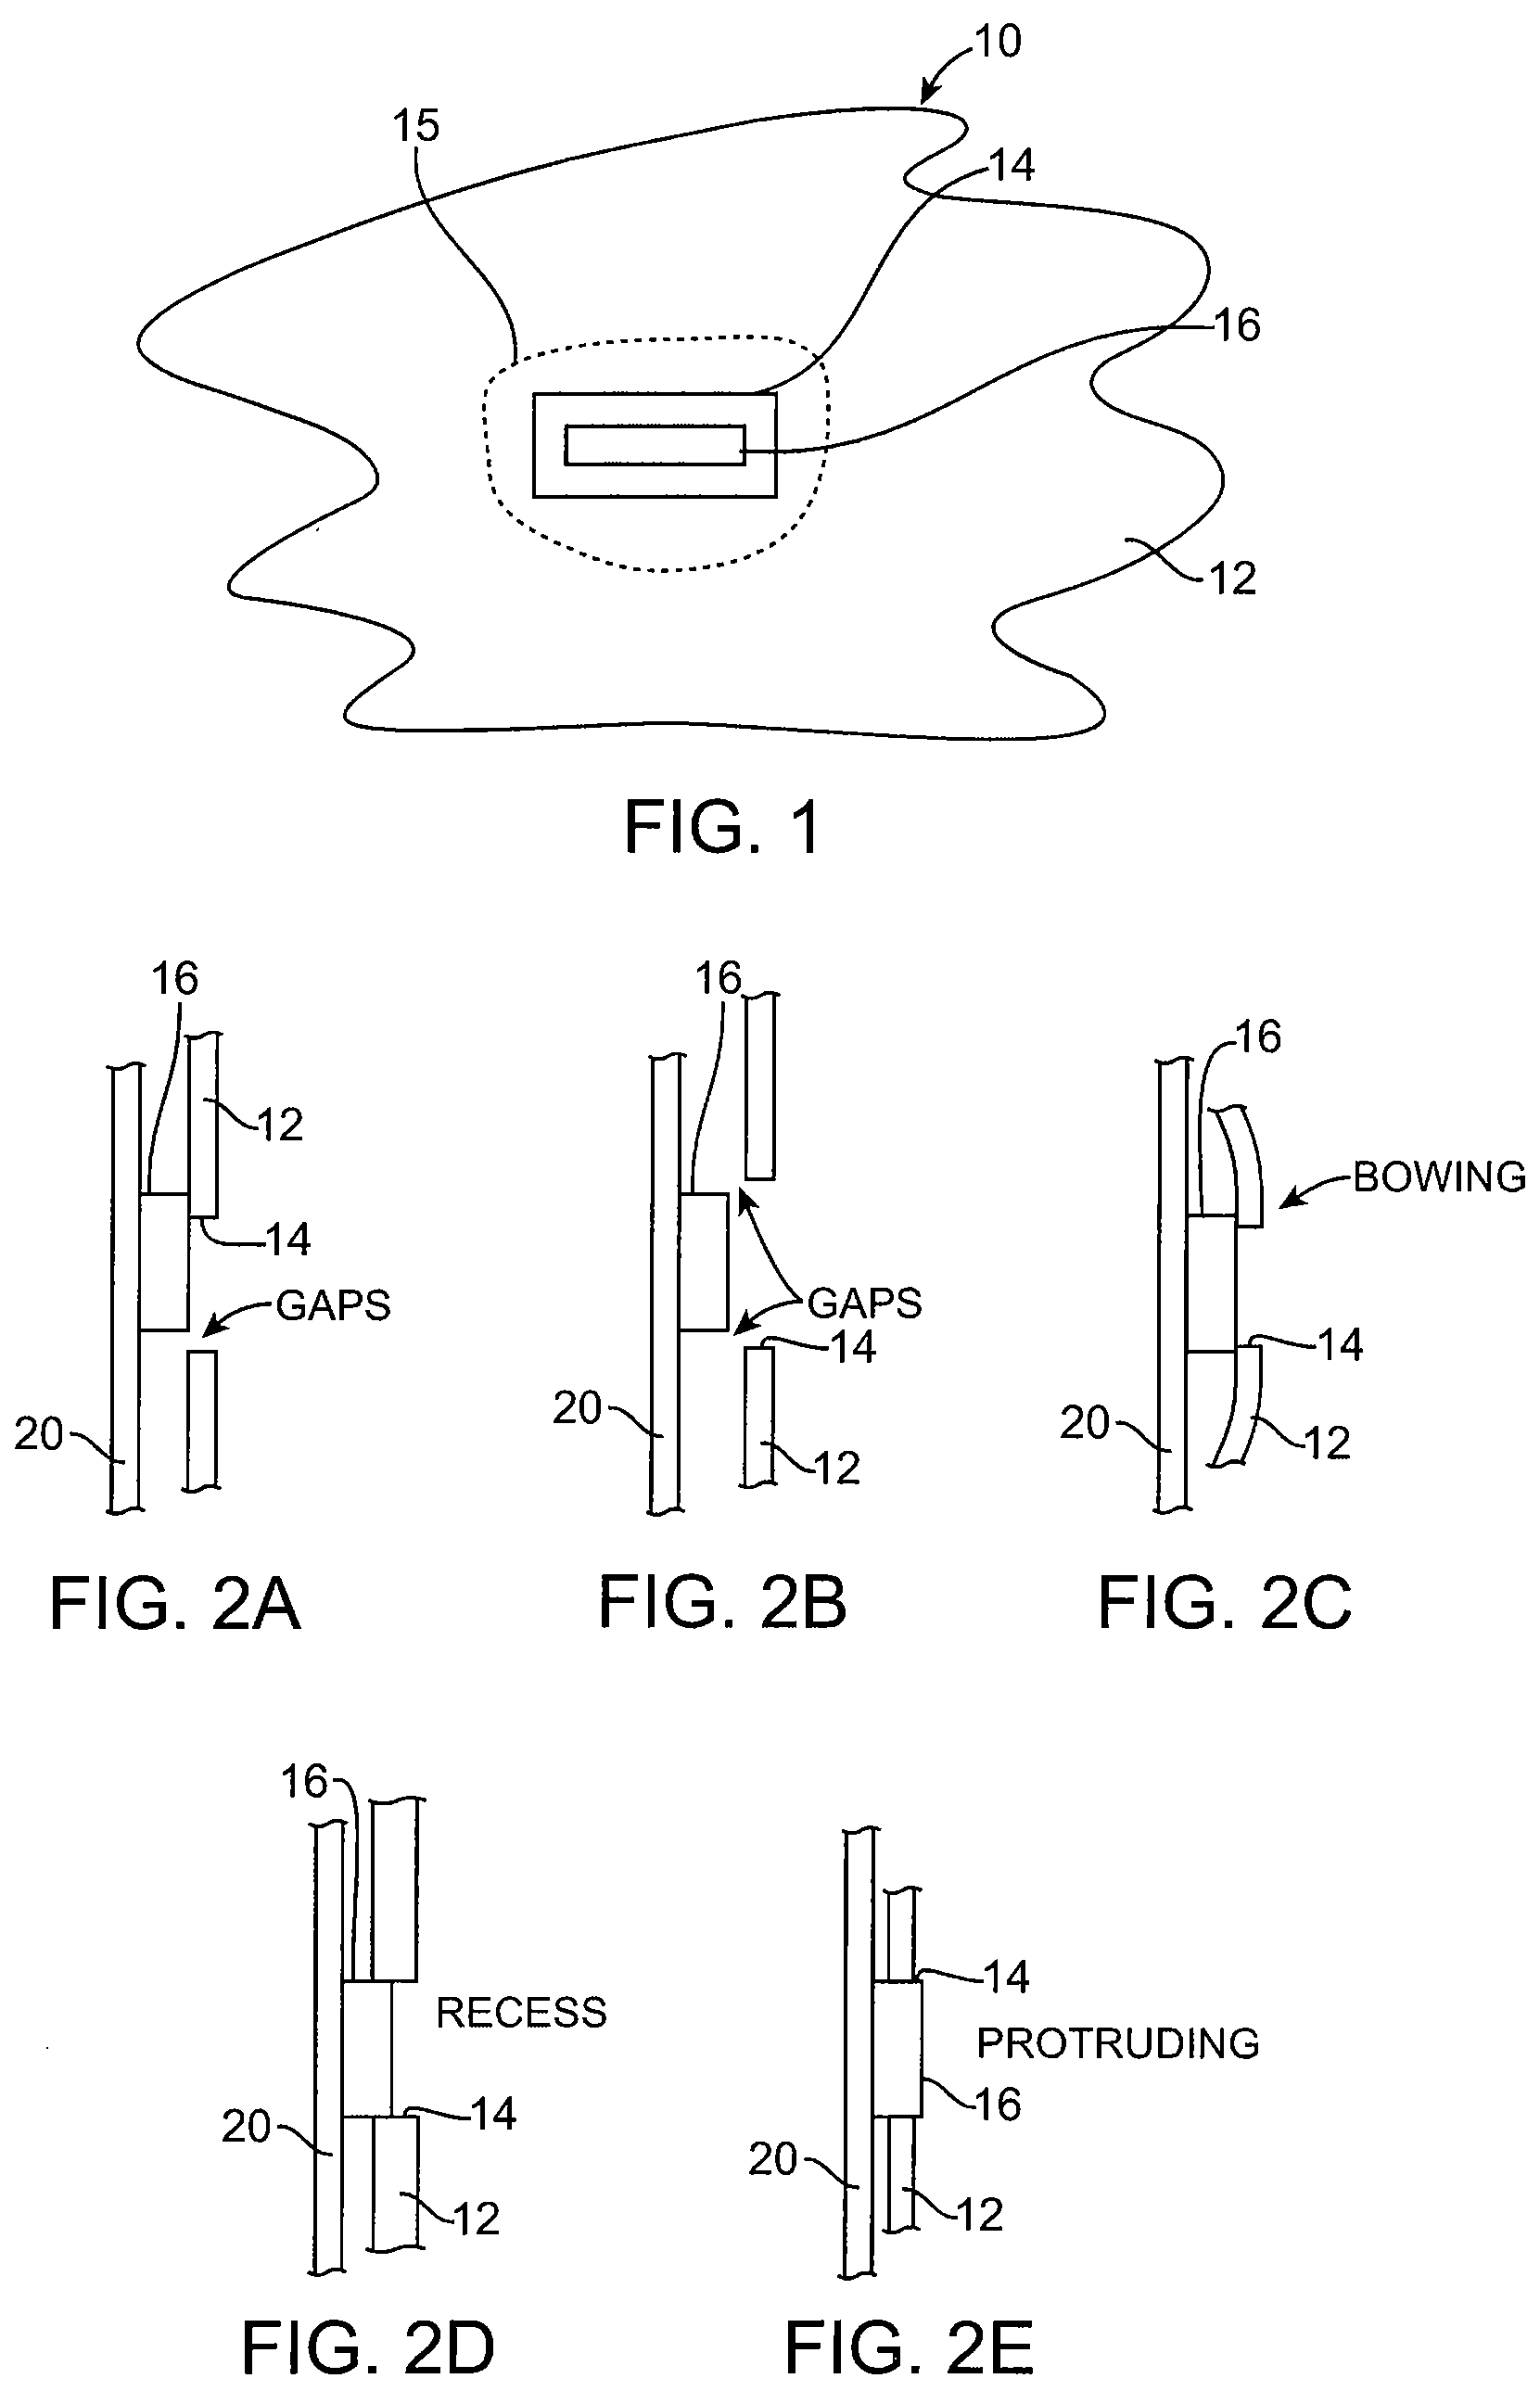 System for coupling interfacing parts